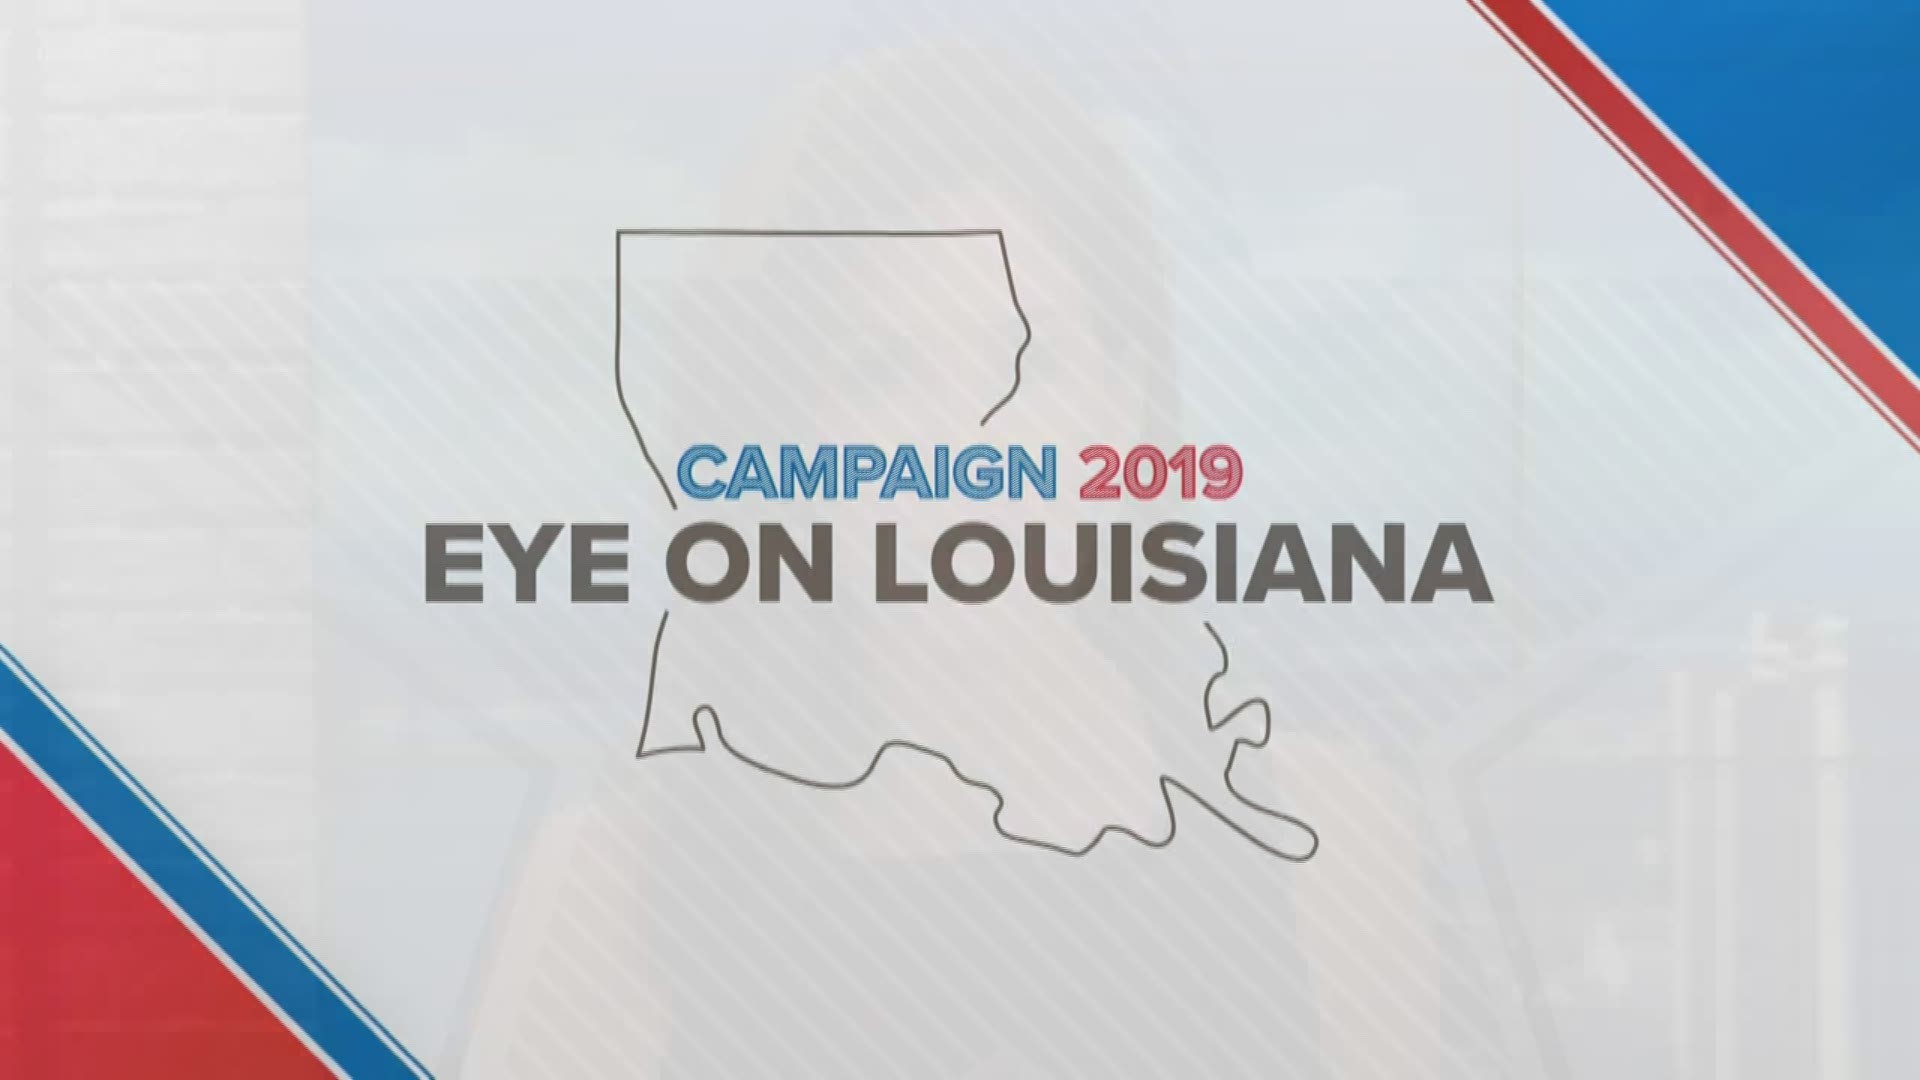 Qualifying analysis of the Louisiana elections